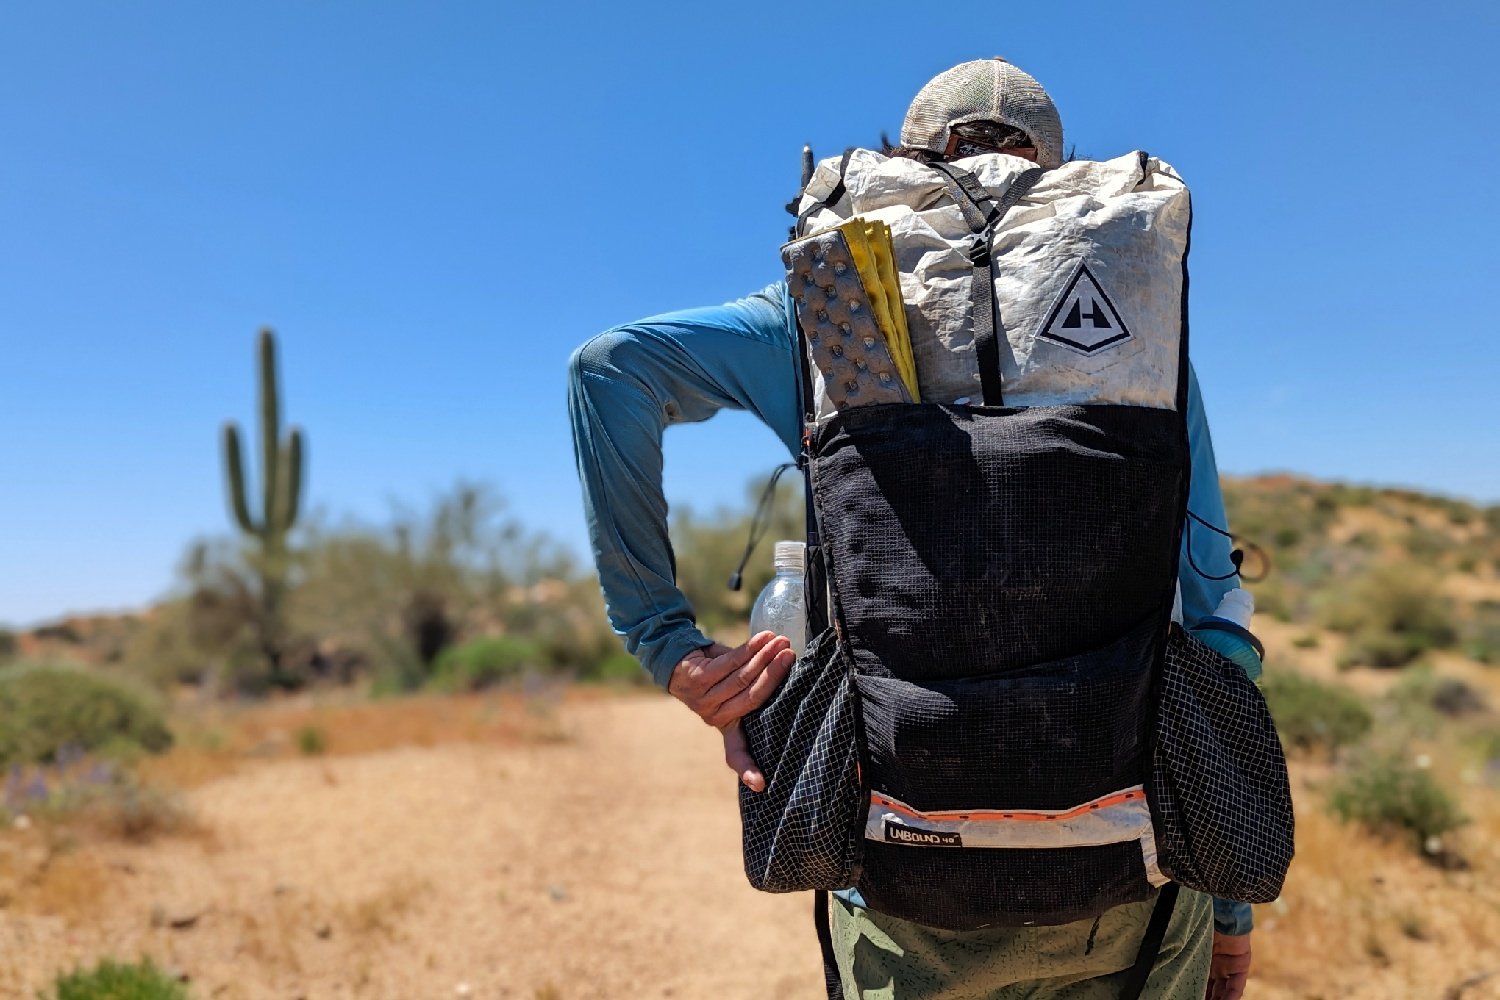 A hiker pulling a water bottle out of the side pocket on the Hyperlite Mountain Gear Unbound 40 - there is a tall saguaro cactus in the background